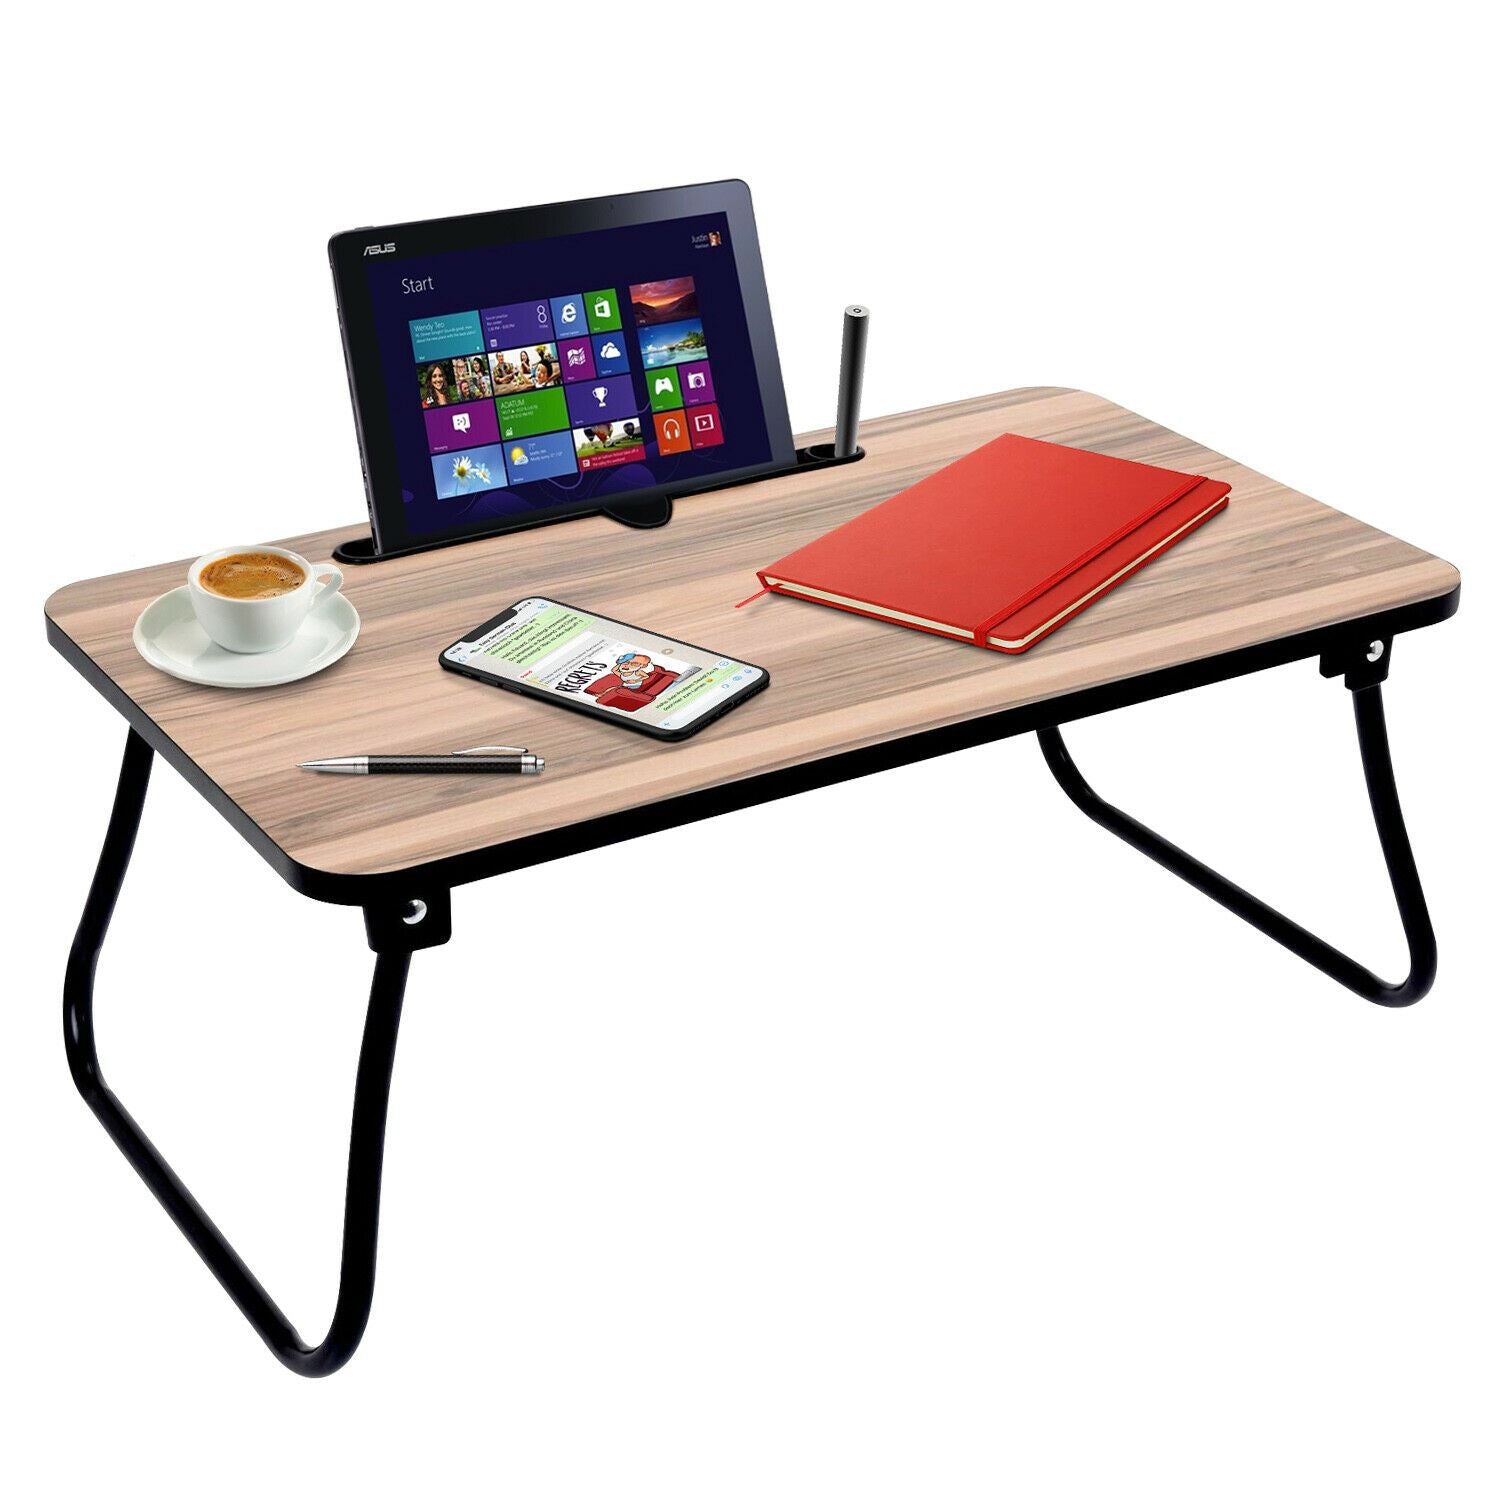 Foldable Laptop and Tablet Bed Table by Geezy - The Magic Toy Shop